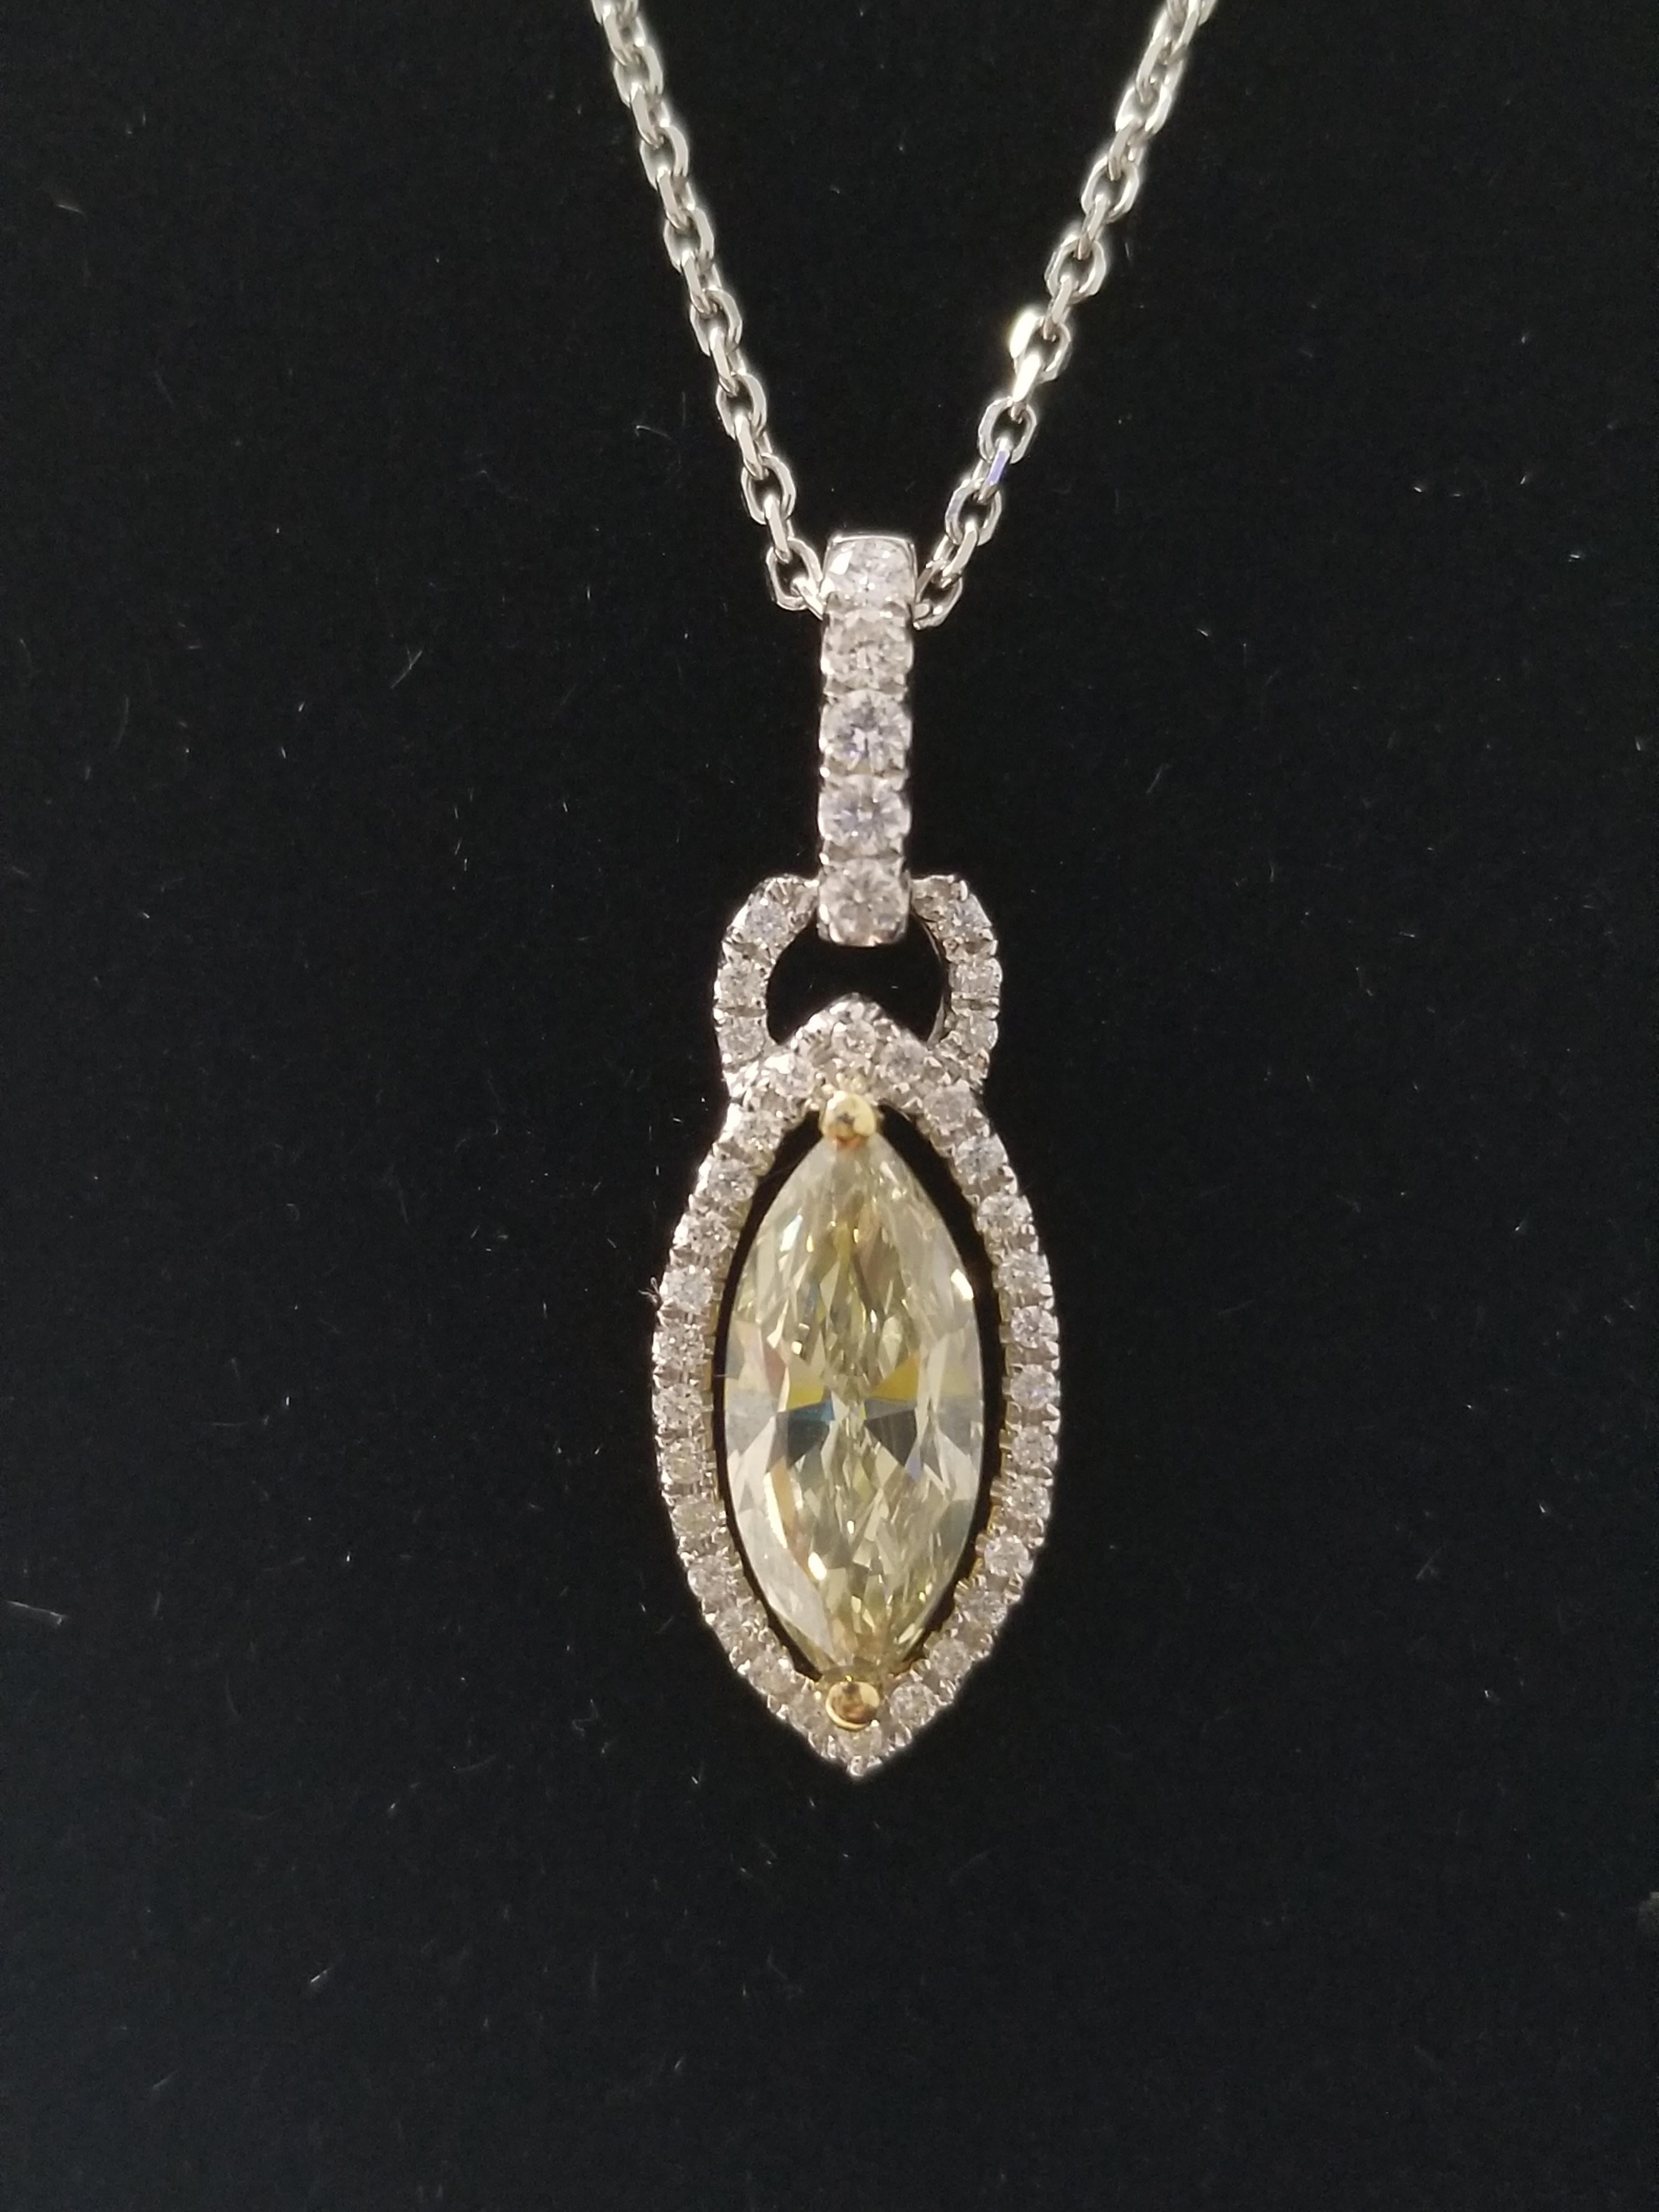 Gorgeous fancy gray-greenish yellow color Marquise cut diamond , unique color combination cushion weighing 1.23 ct, surround by mixed white marquise and round brilliant cut diamonds. set in 14k white gold. pendant measures approximately 1 inch